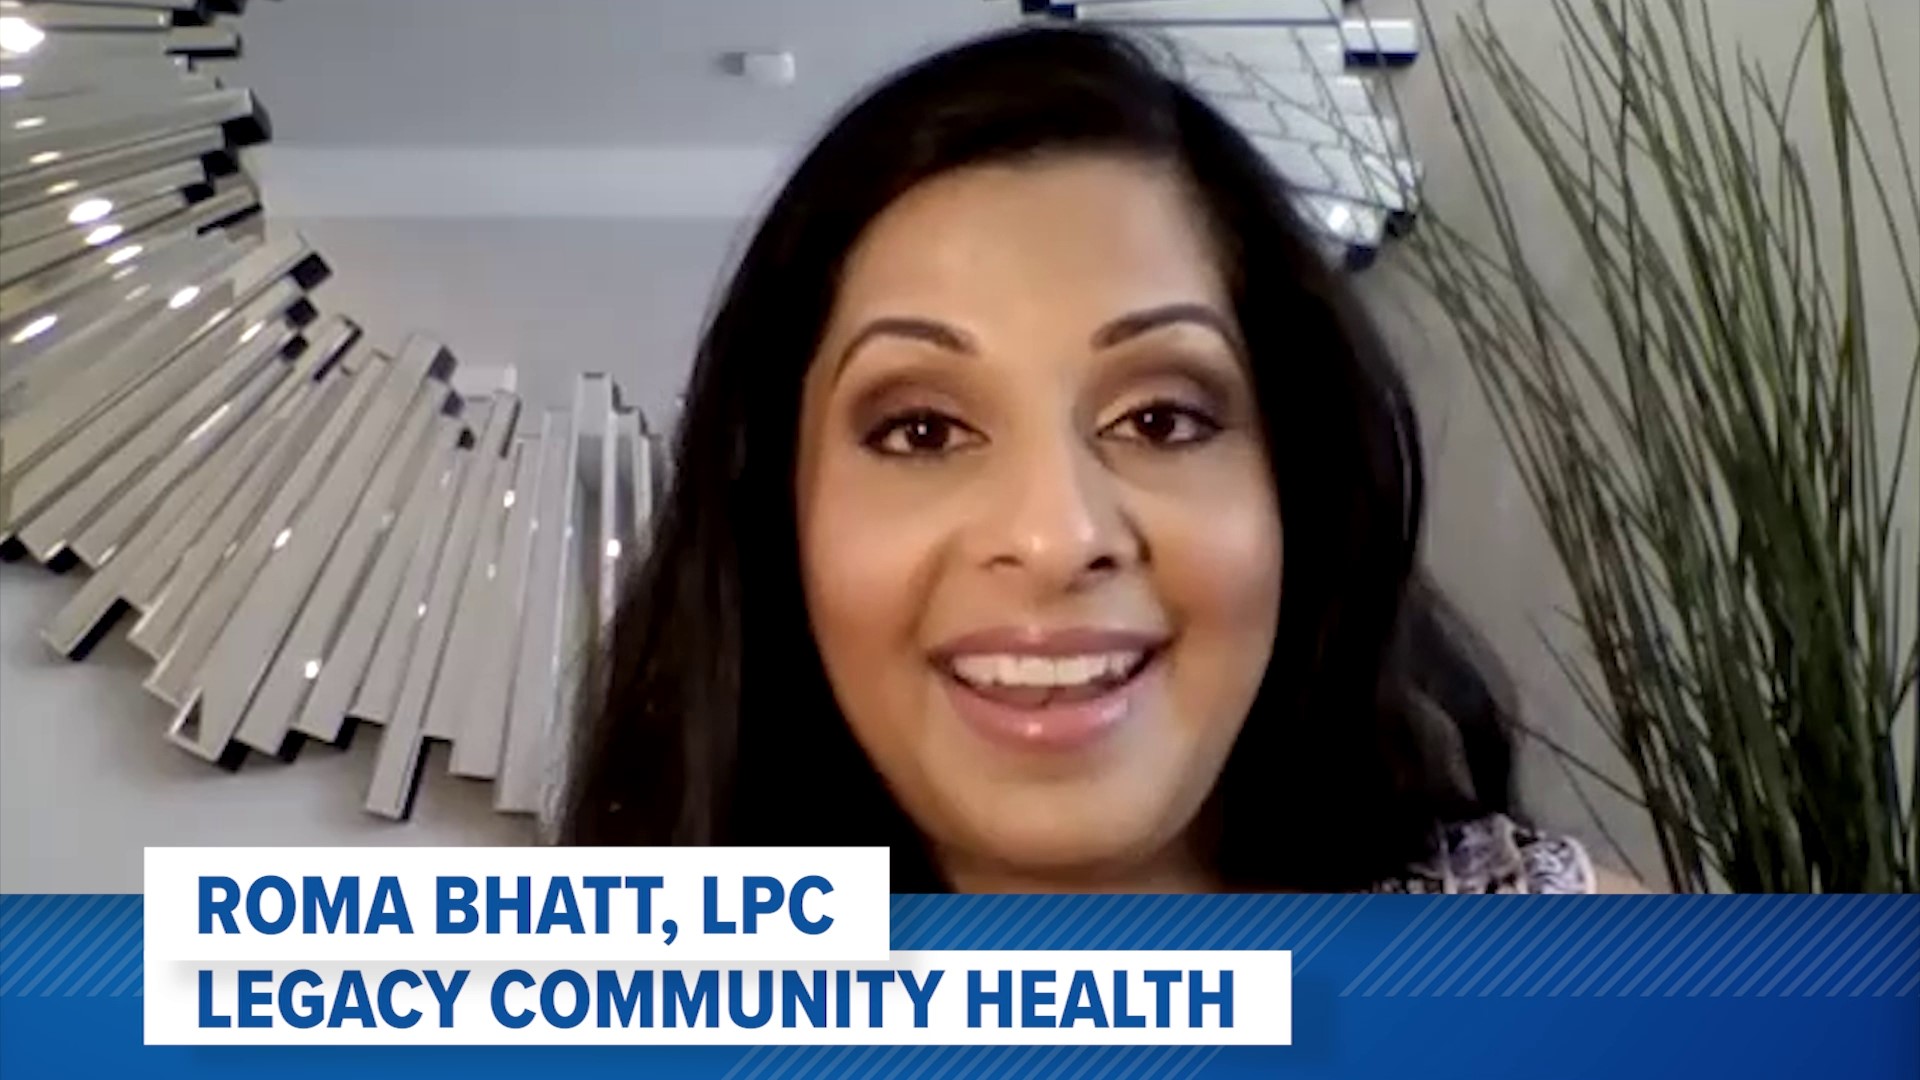 During Stress Awareness Month, Legacy Community Health’s Roma Bhatt discusses how you can identify stress and help your children manage it.